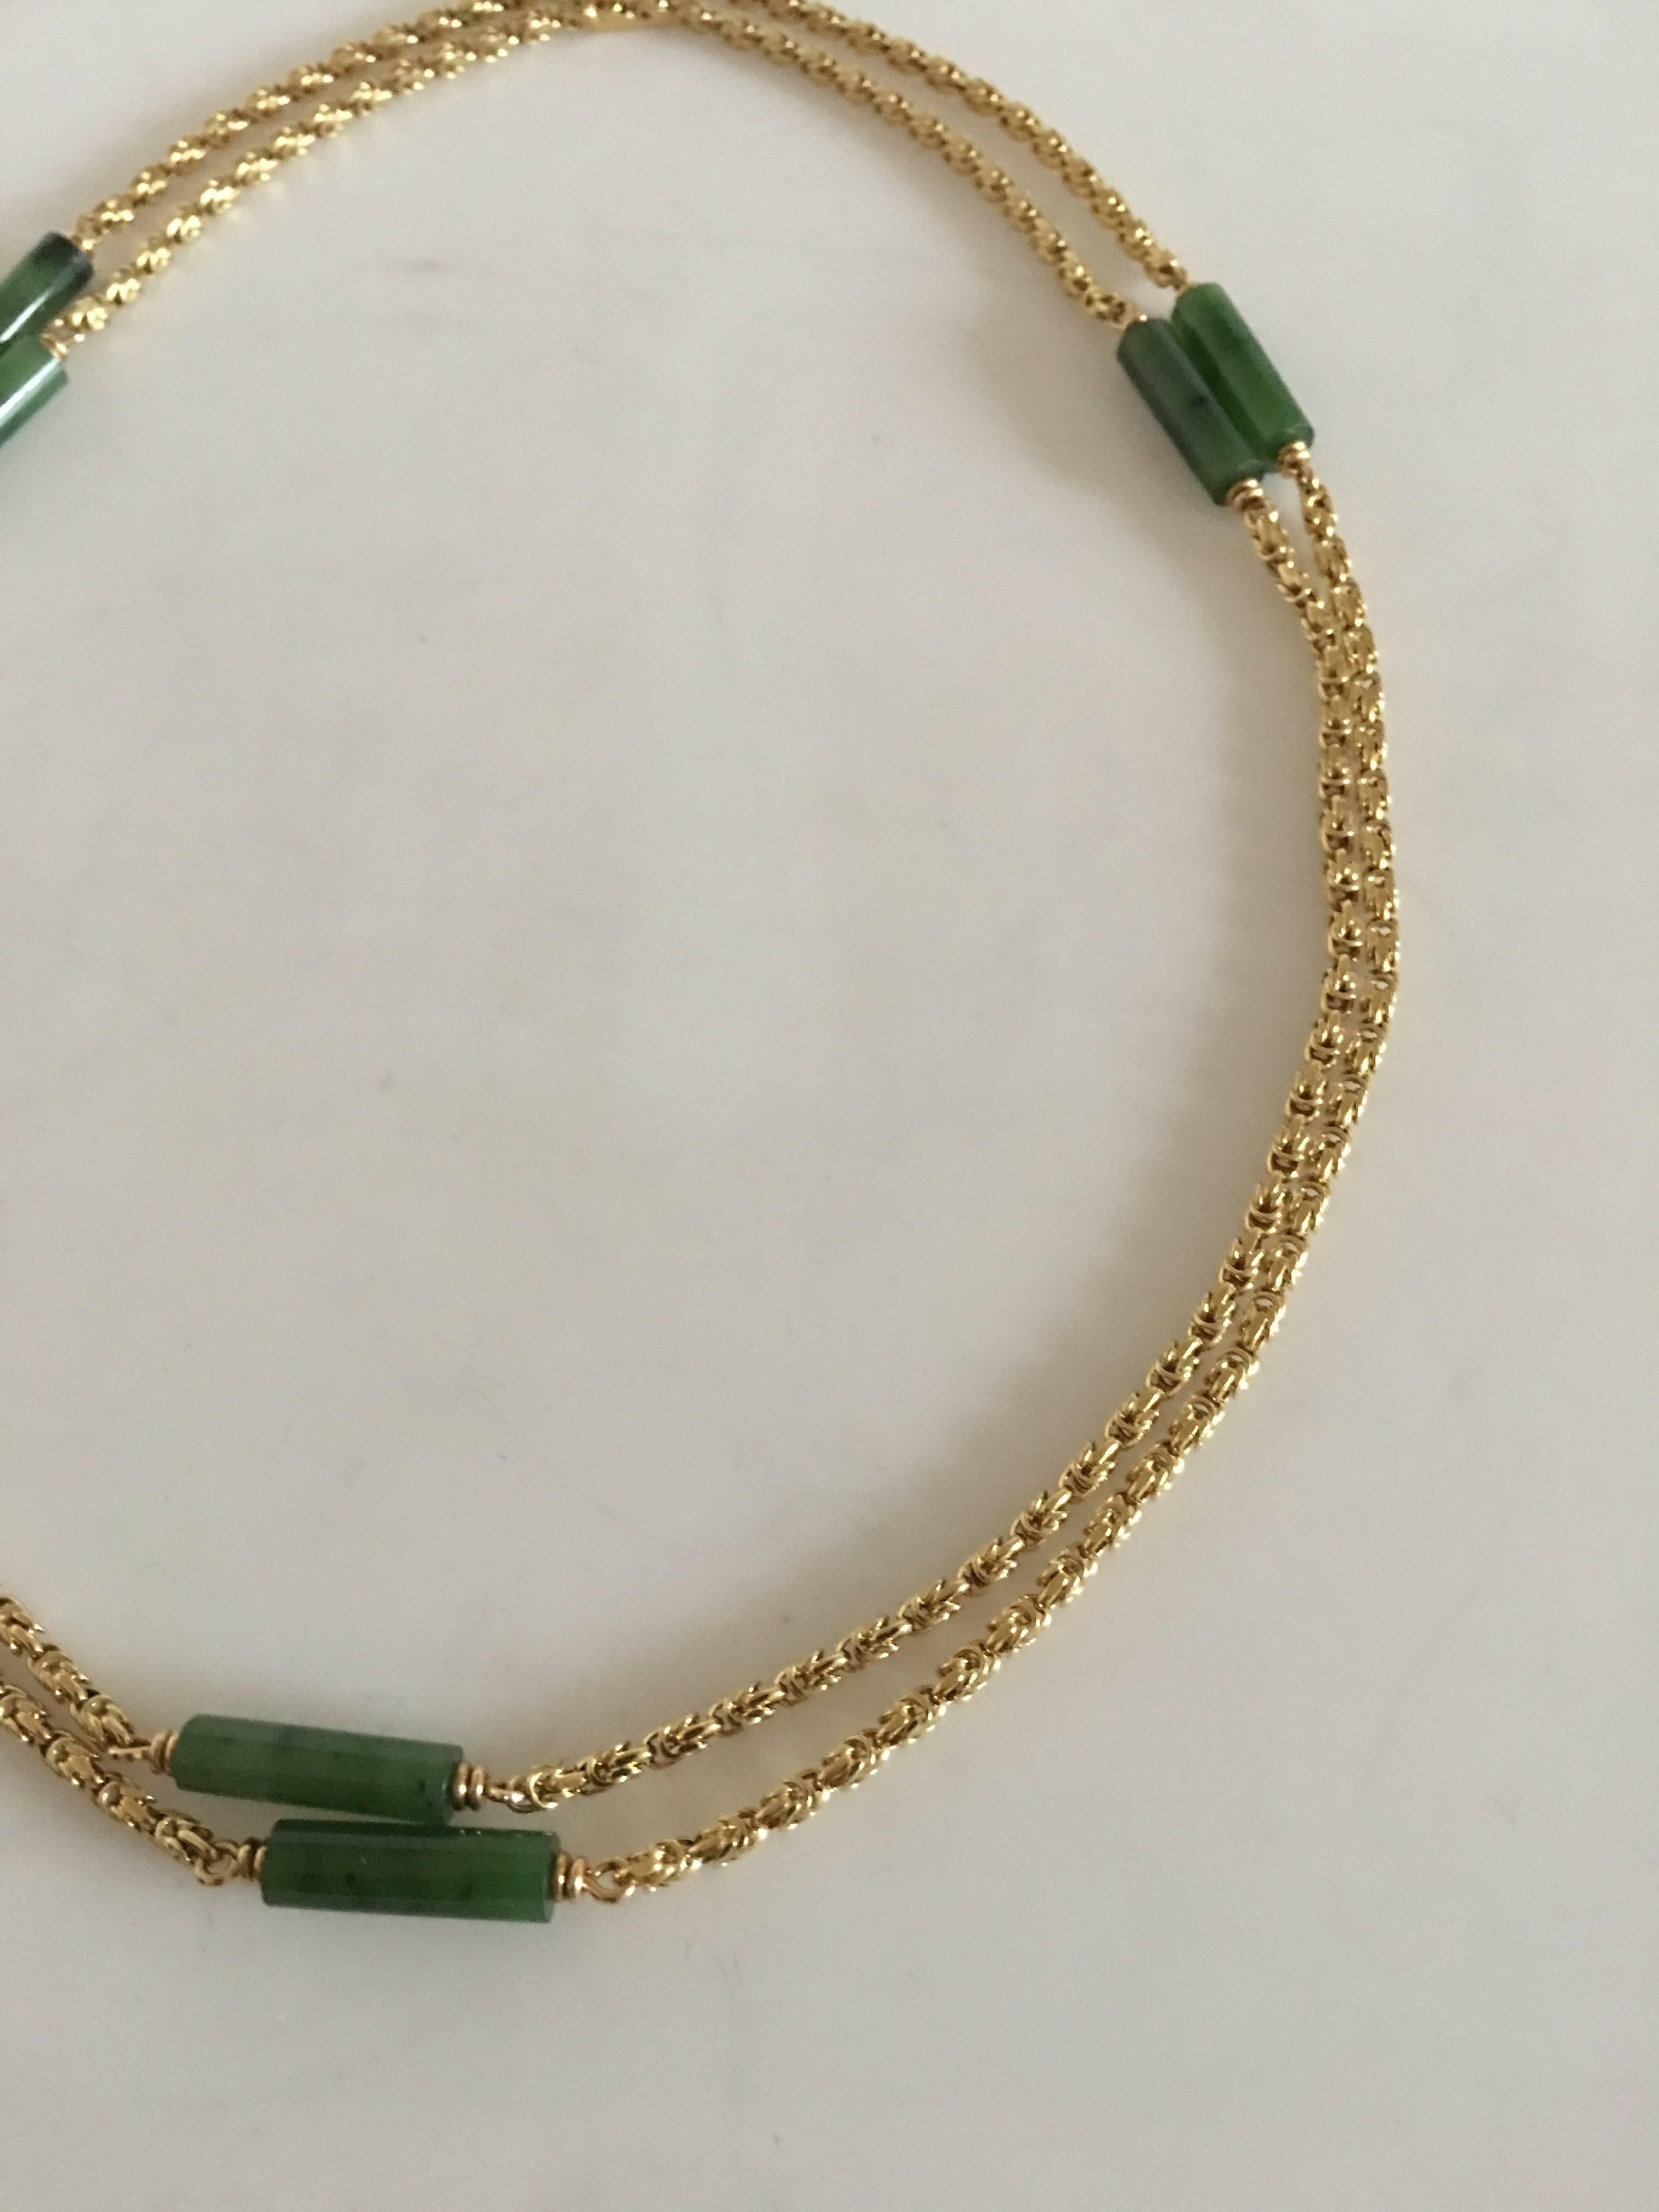 Georg Jensen 18-karat gold collier necklace ornamented with six pieces of jade stone. 108 cm L (42 33/64